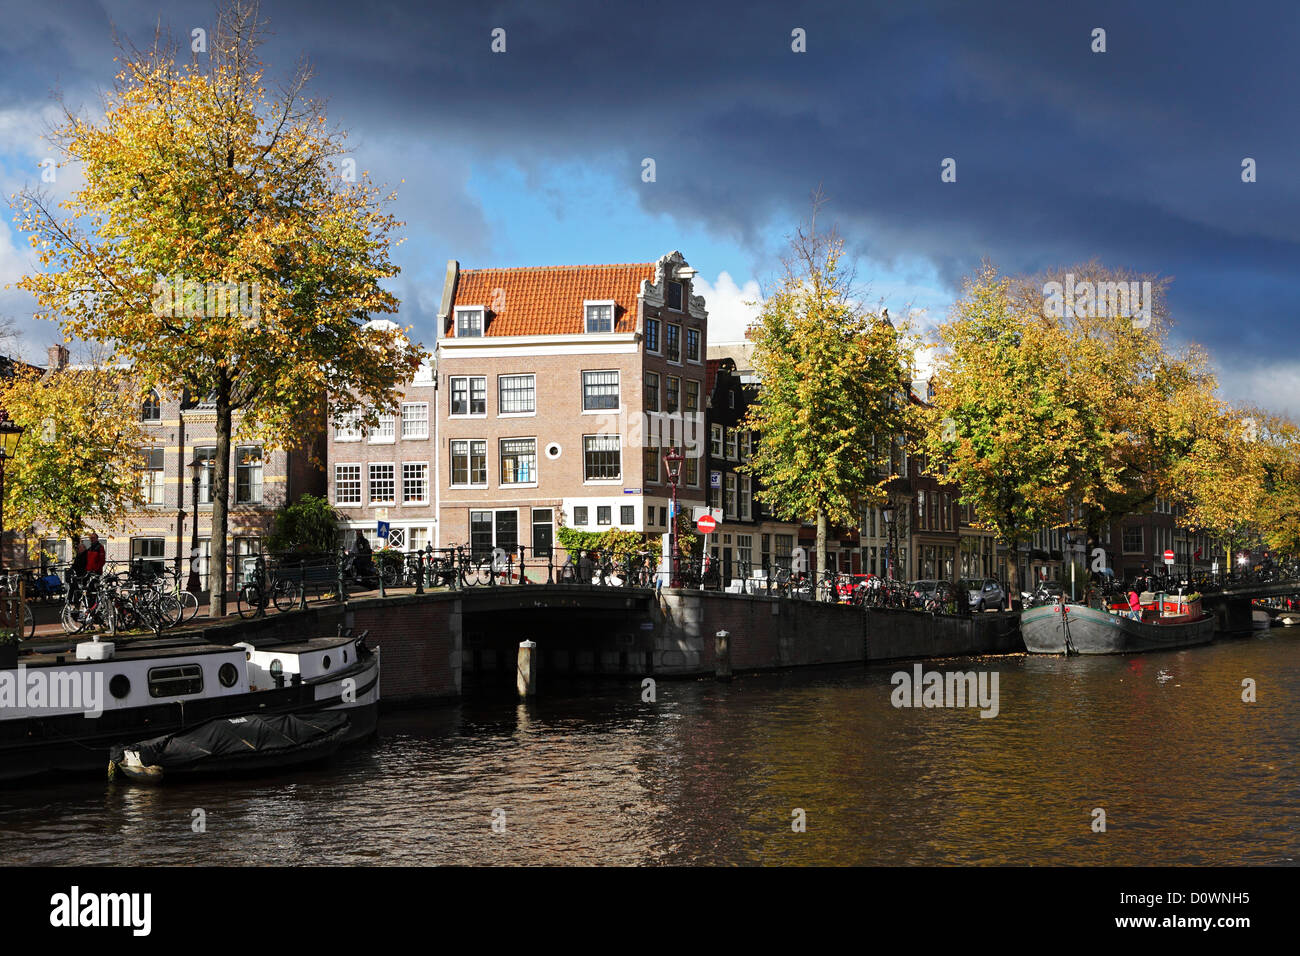 Clouds gather over a canal on the Negen Straatjes (Nine Streets) district of Amsterdam, Holland, the Netherlands. Stock Photo